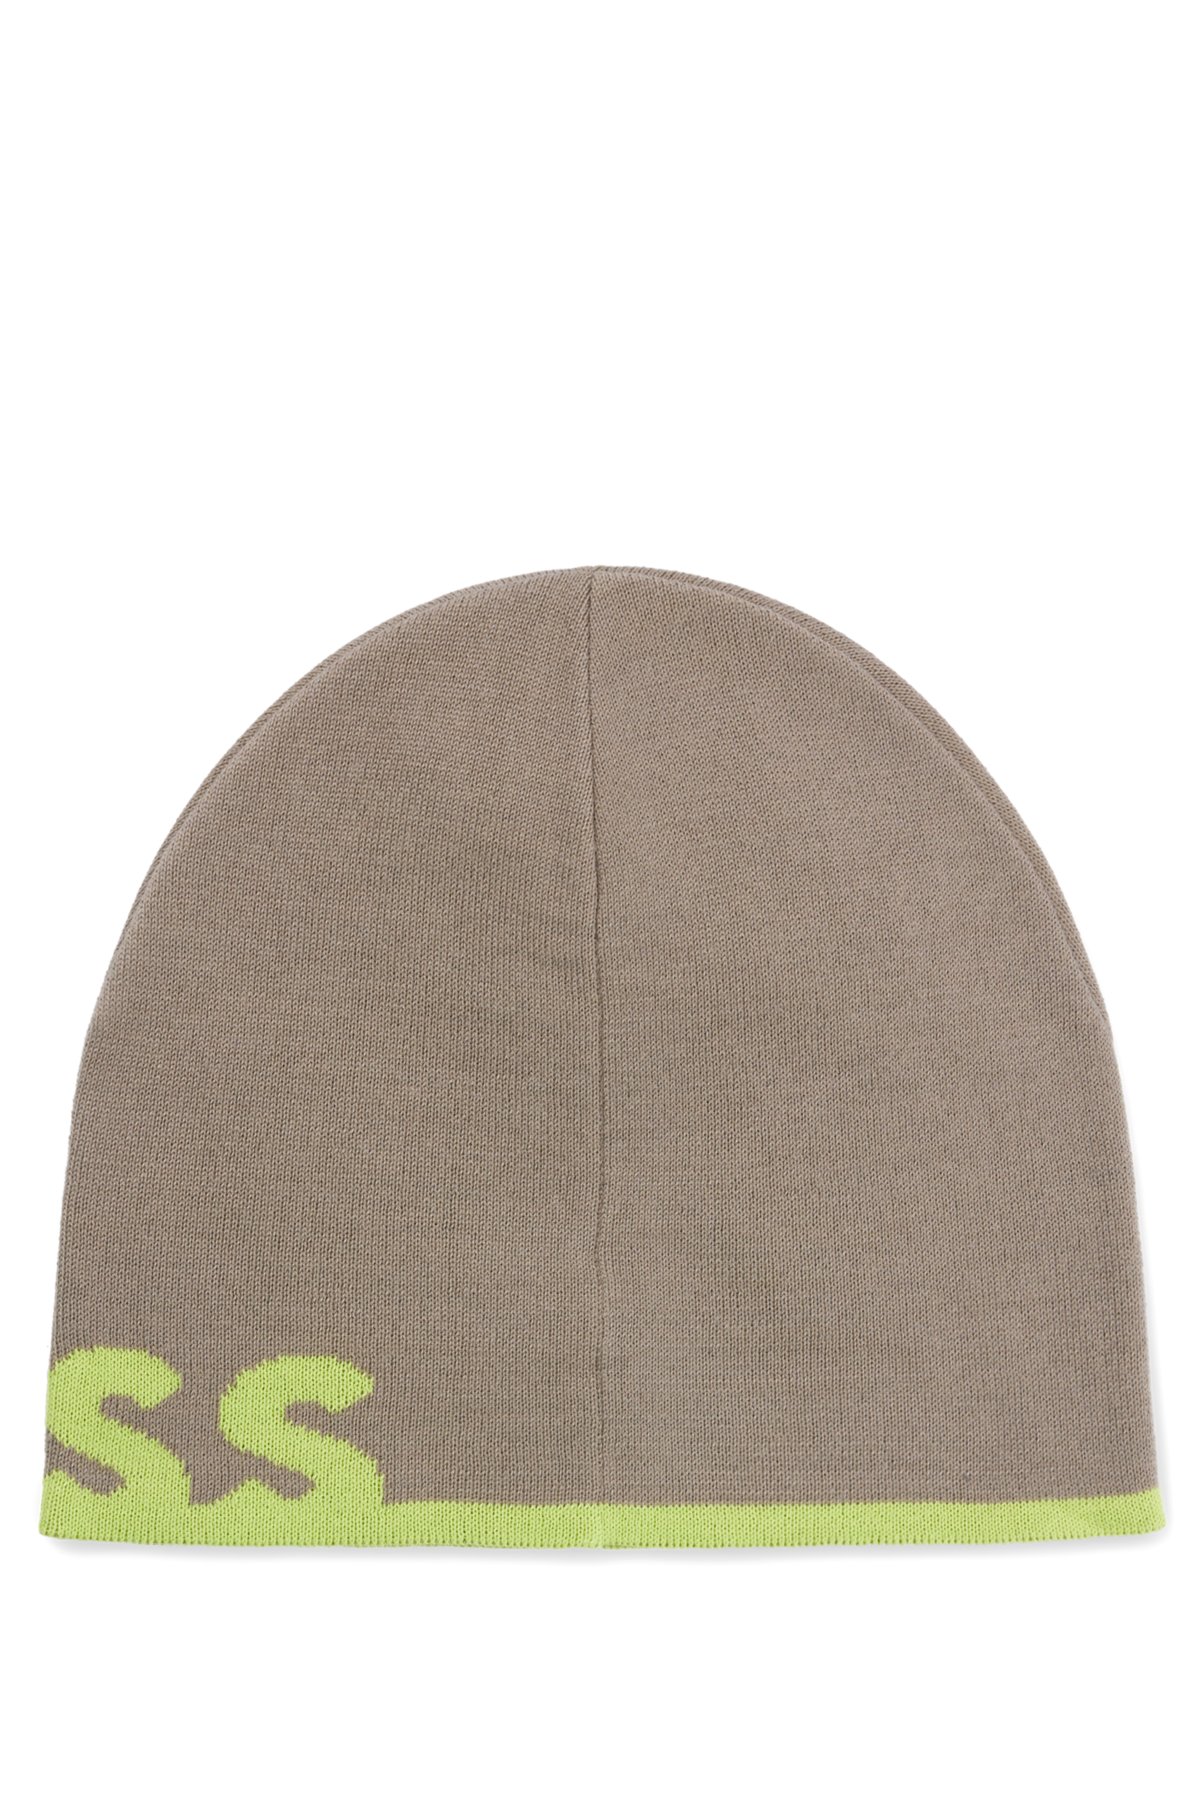 with - BOSS in hat wool logo Beanie a blend